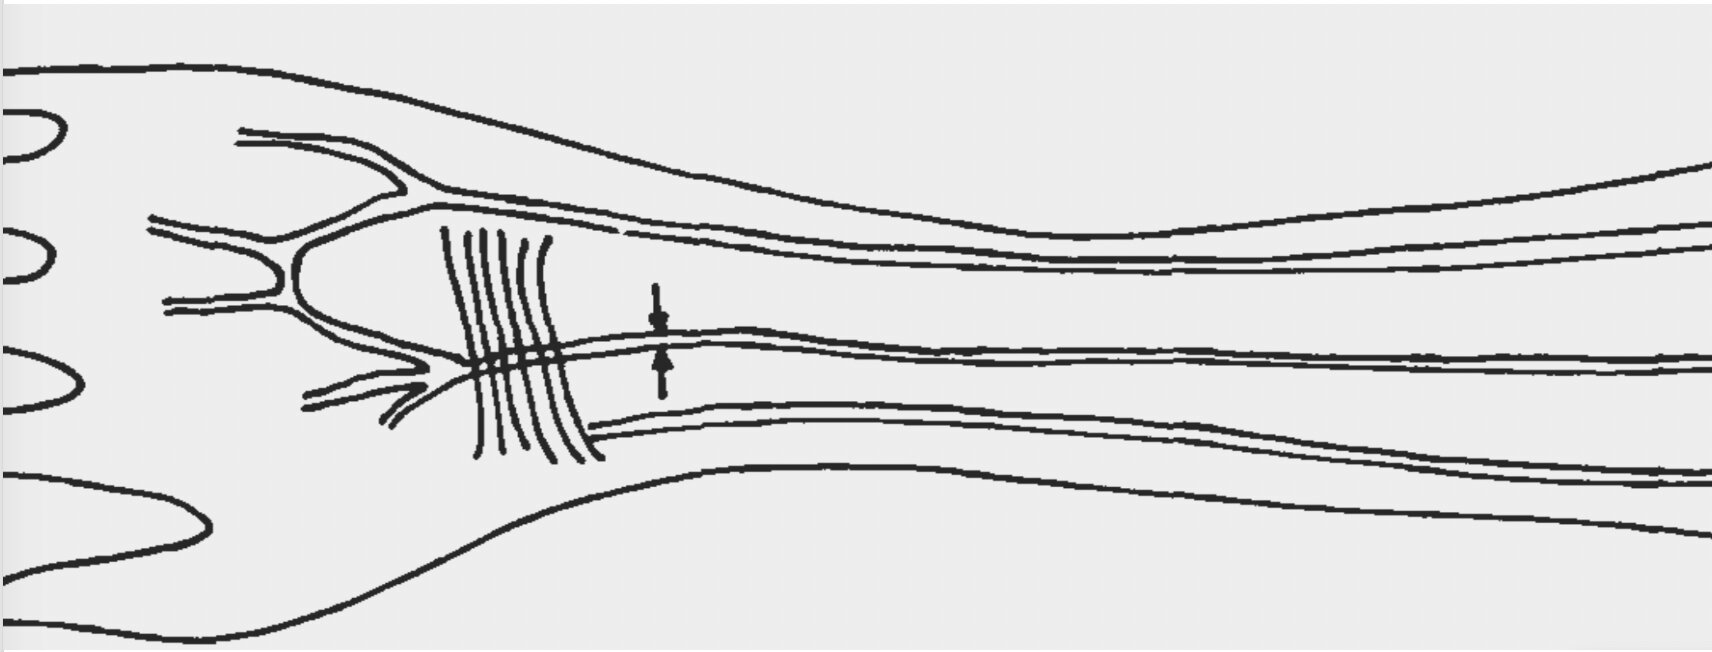 Forearm artery reveals humans evolving from changes in natural selection